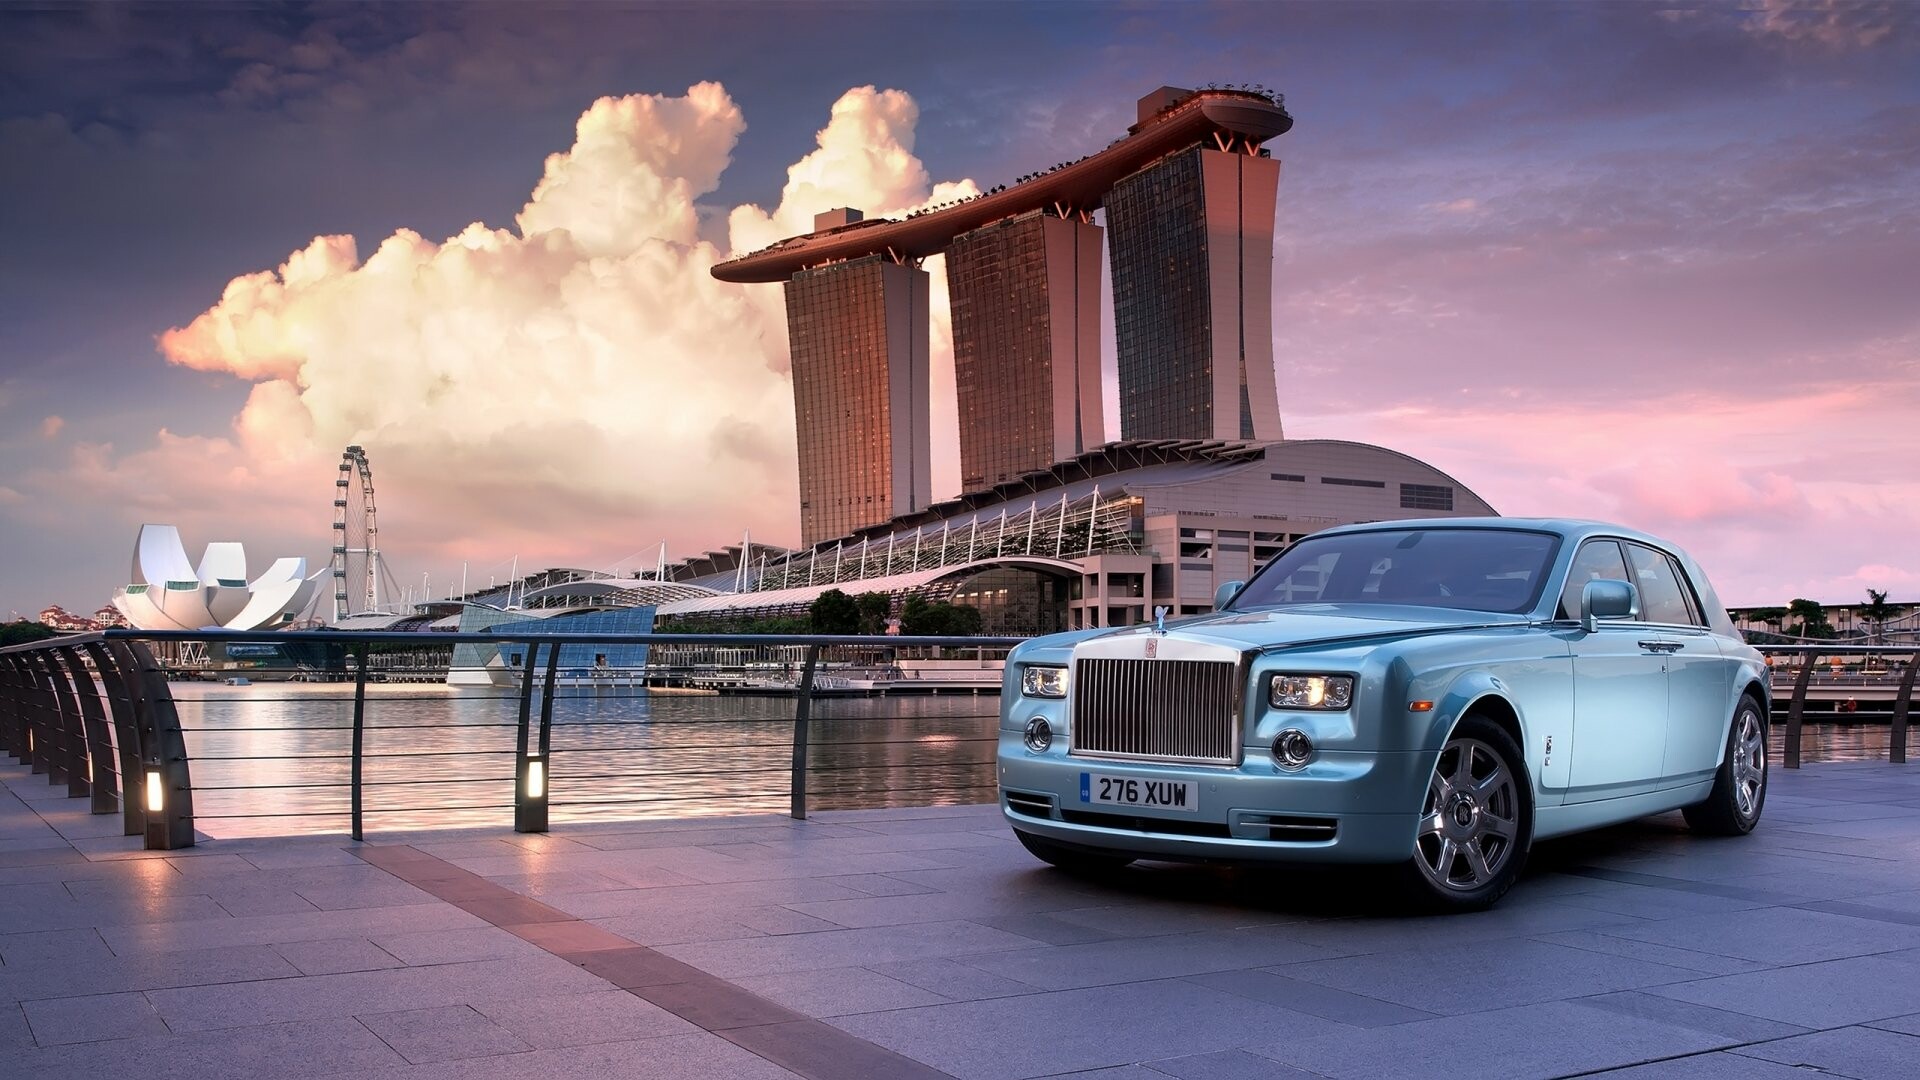 Rolls-Royce: The company unveiled a new Phantom at "The Great Eight Phantoms Exhibit". 1920x1080 Full HD Background.